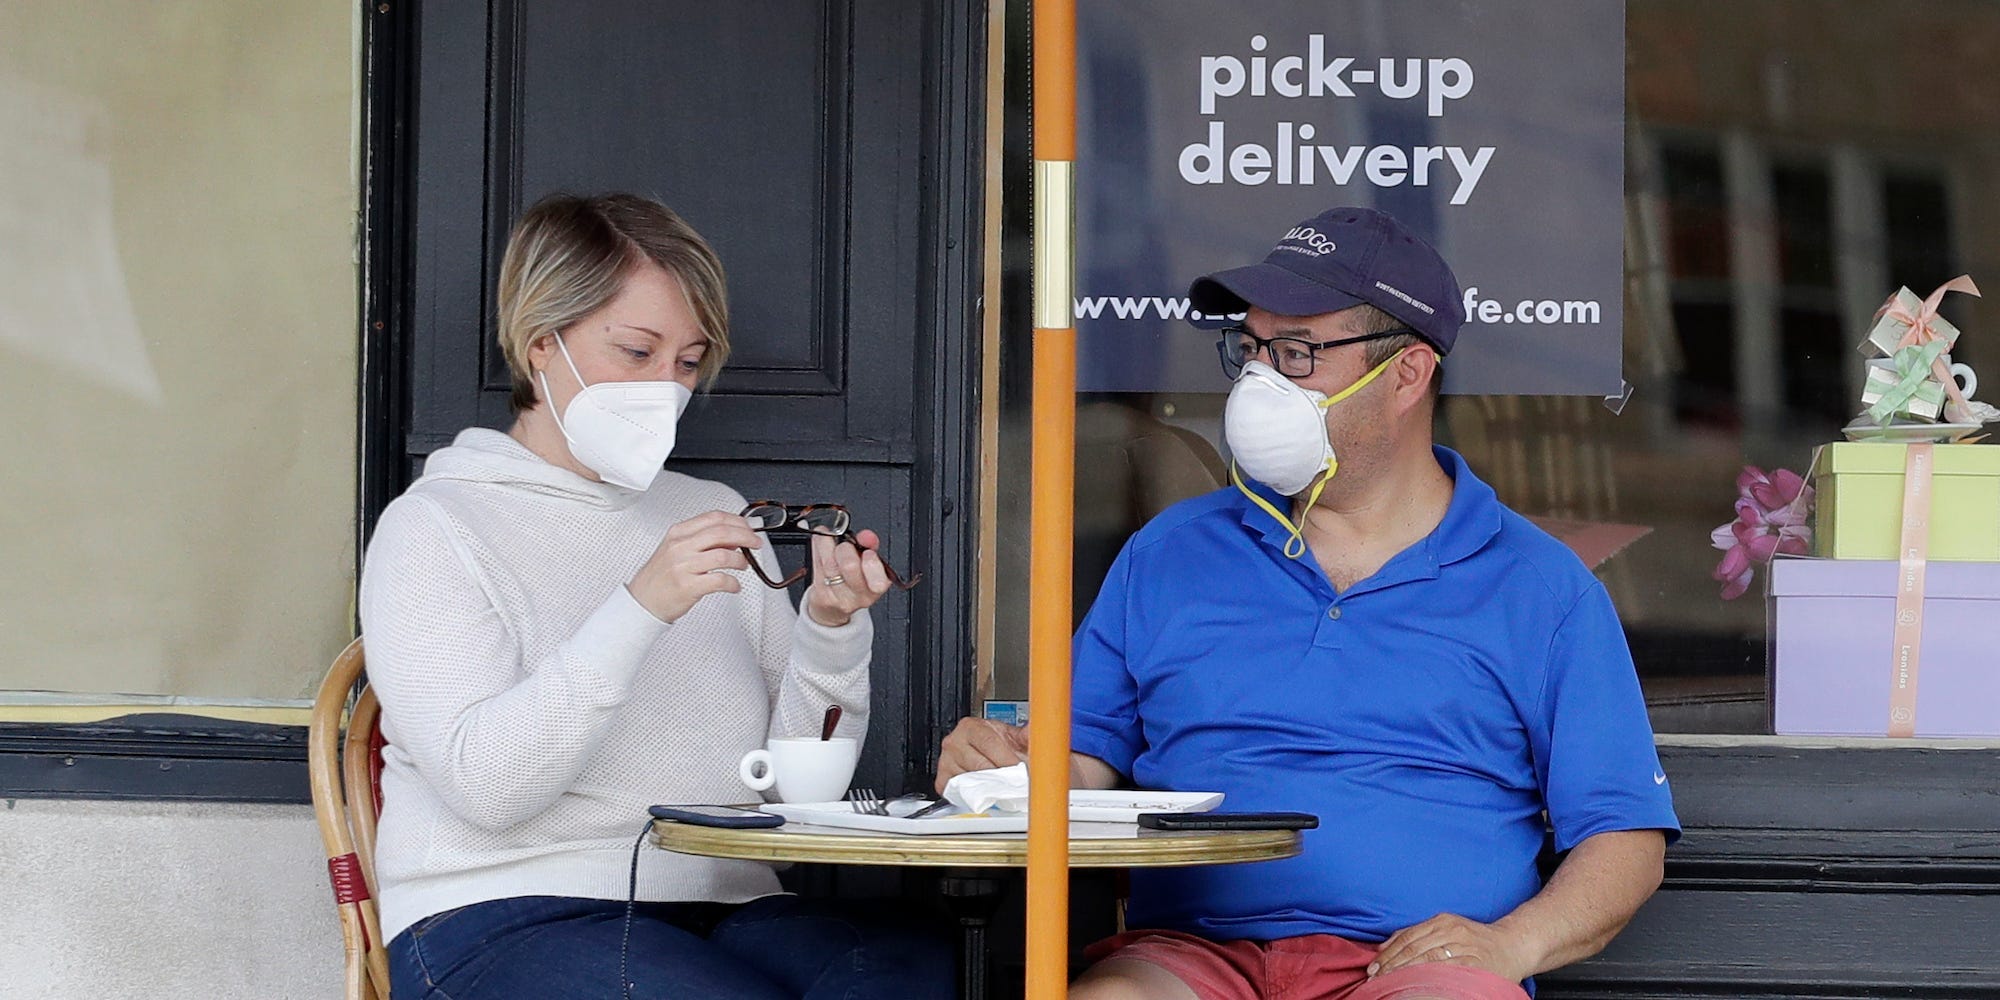 People wear mask after eating outside of a restaurant in Evanston, Ill., Friday, May 29, 2020.